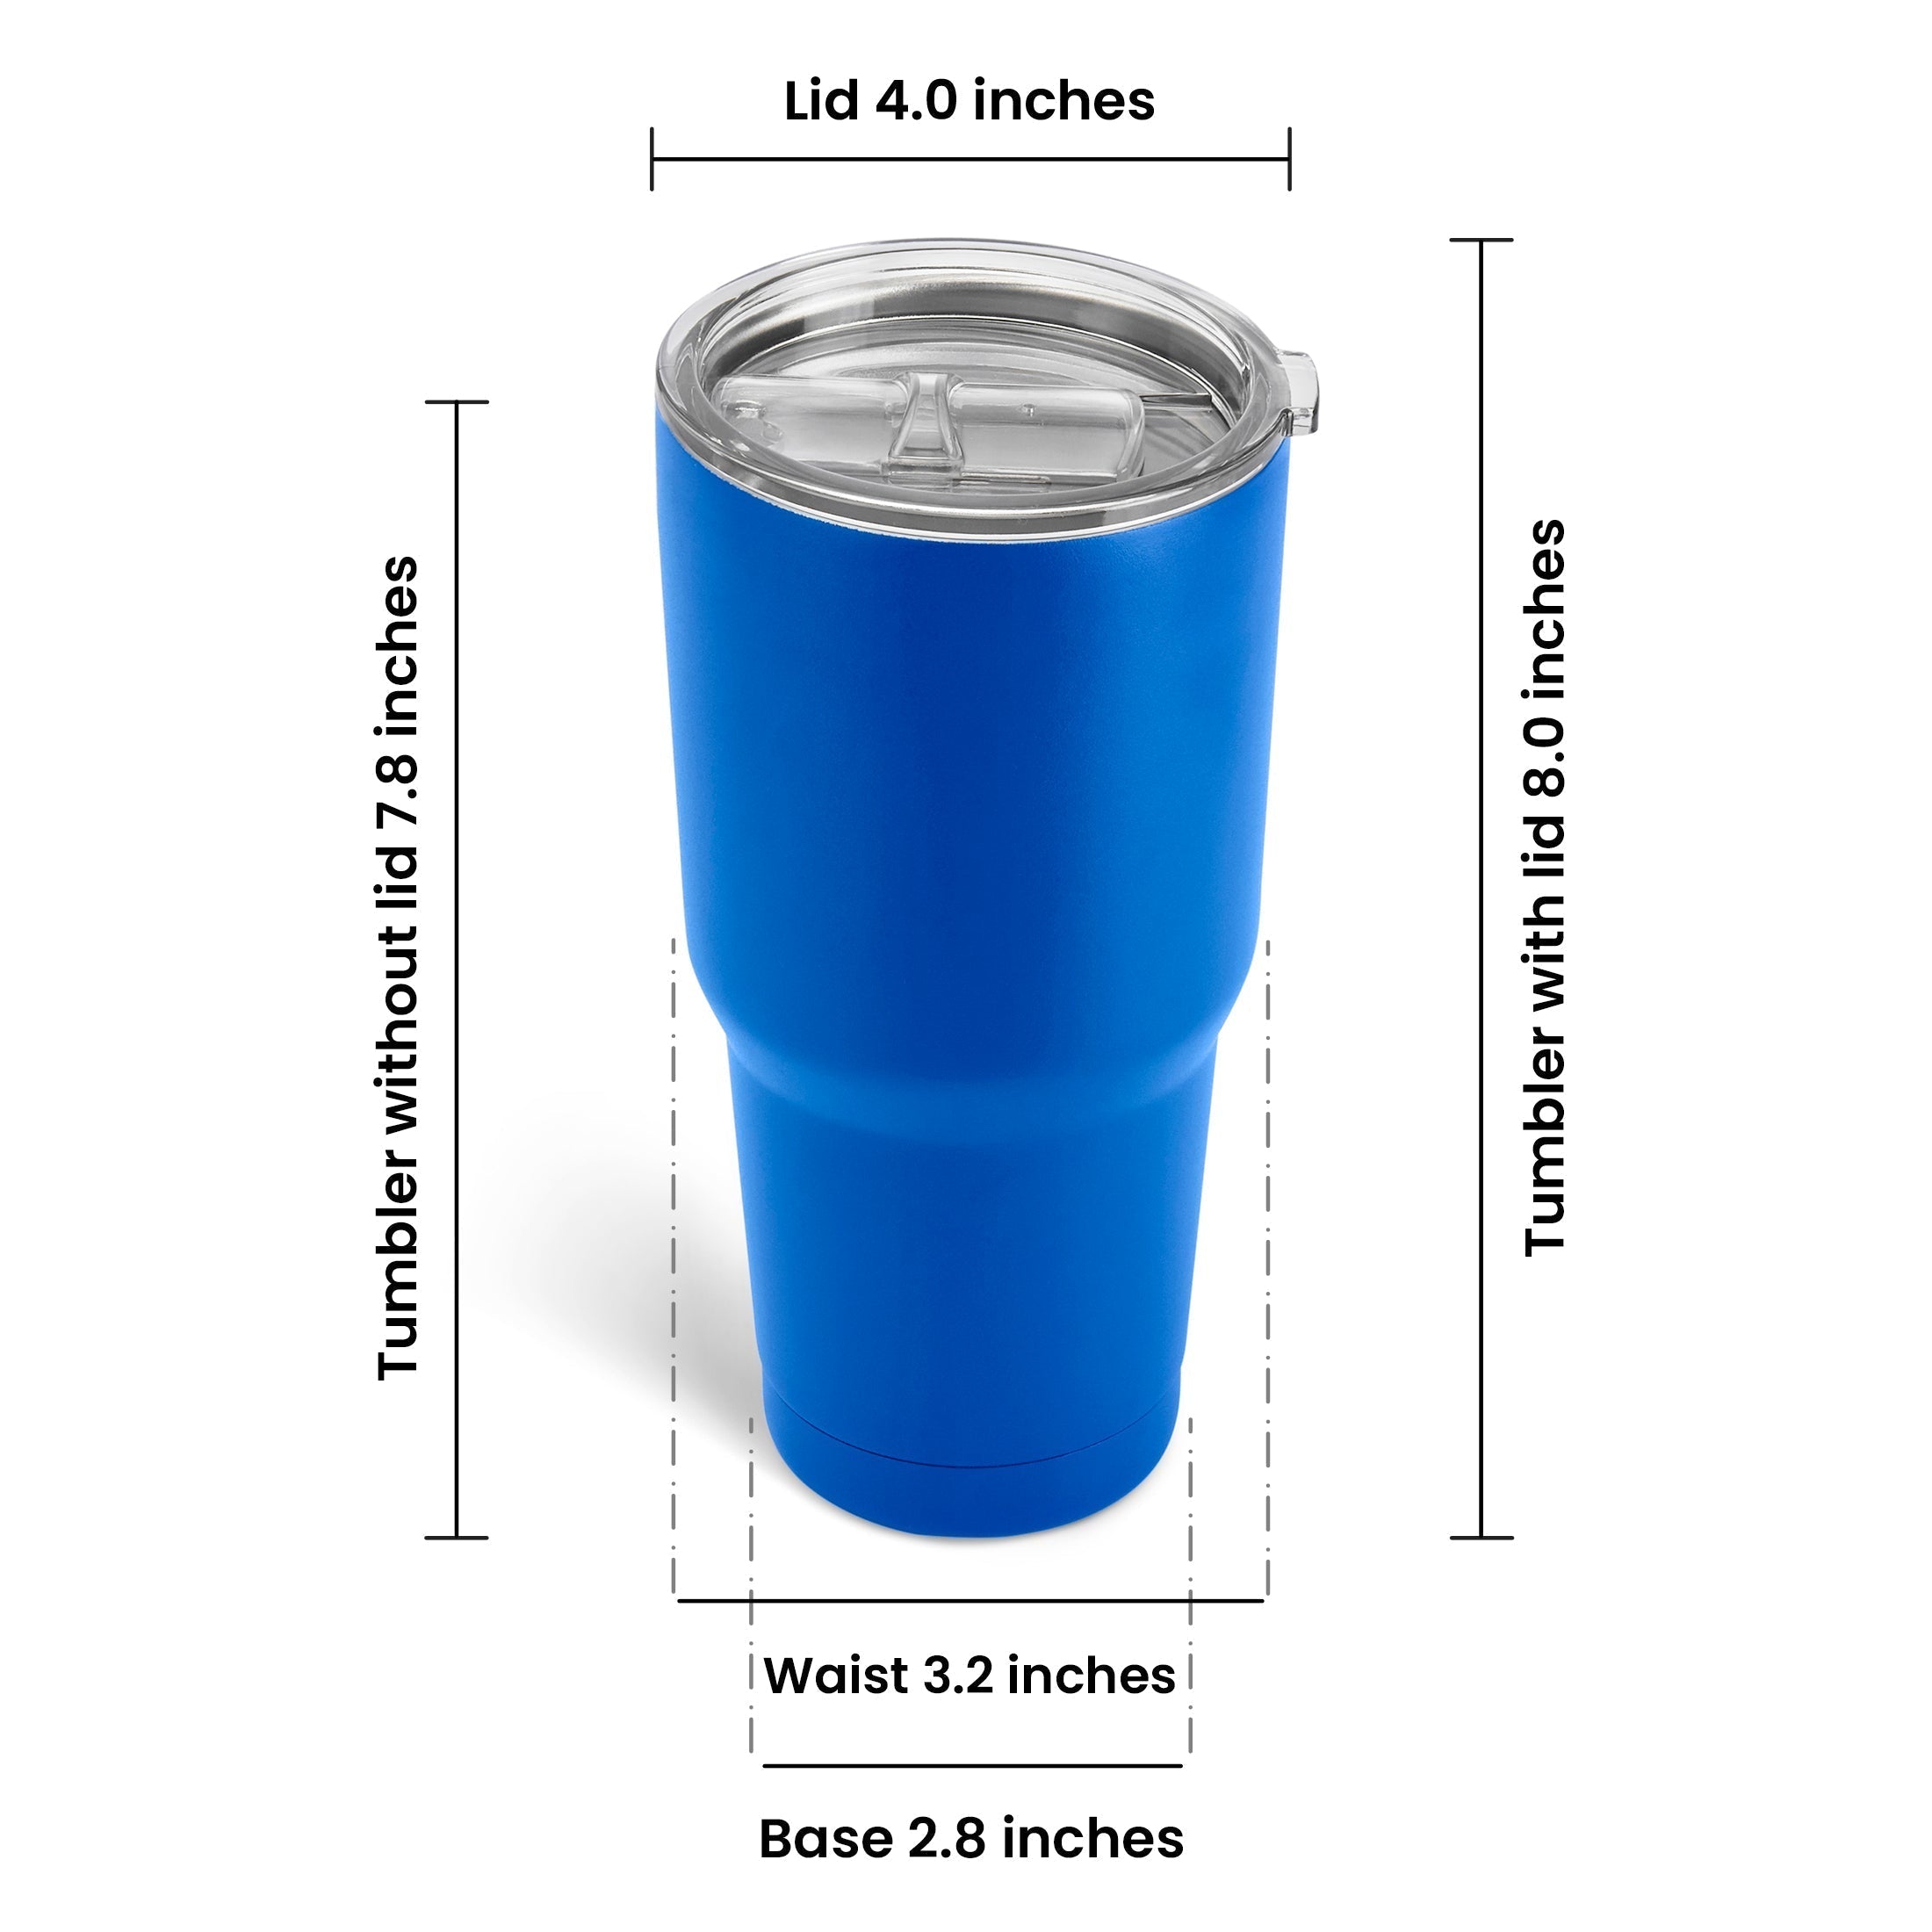 30oz Tumblers for Singles